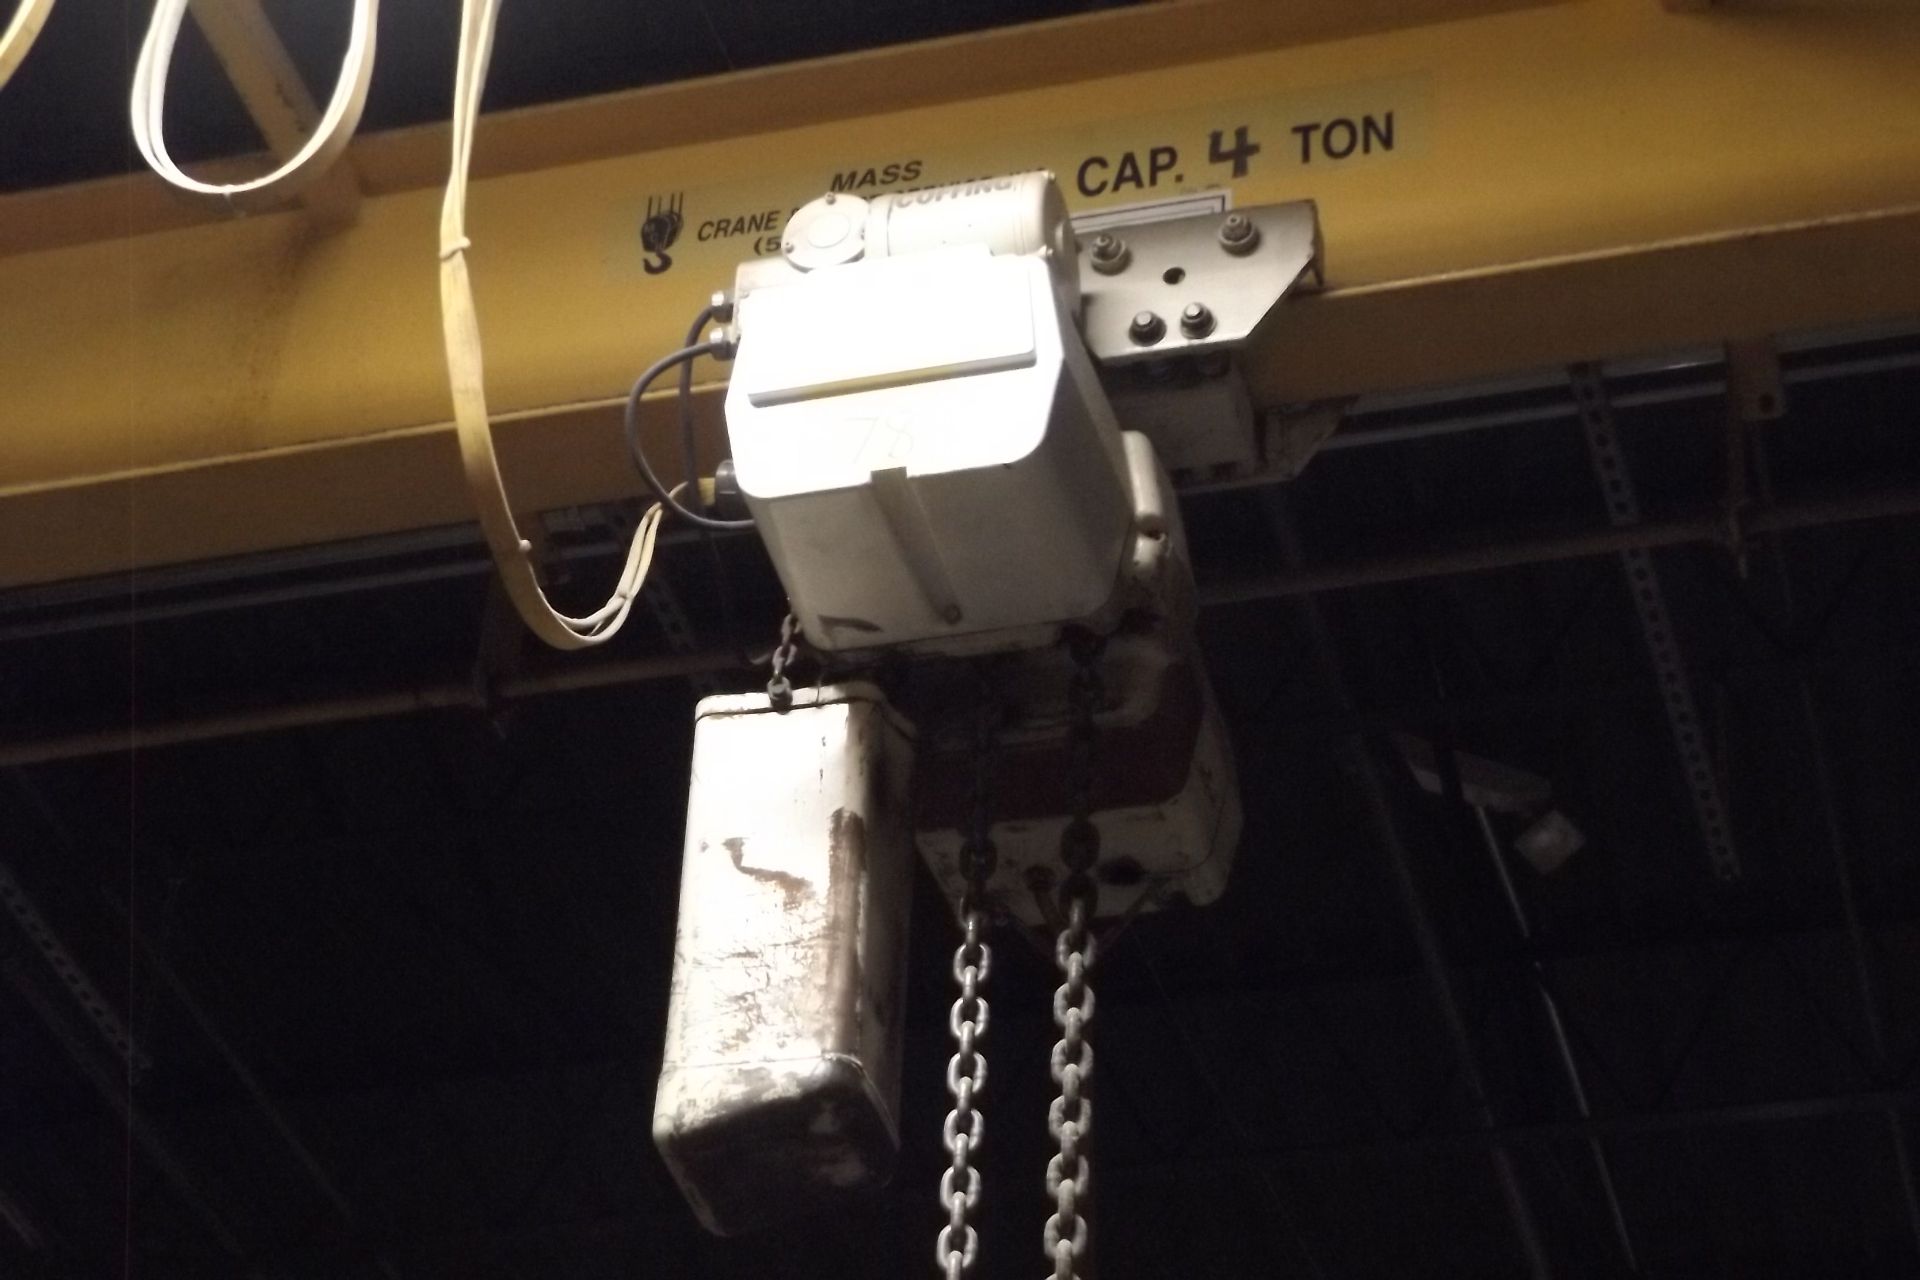 4-Ton Cap. Crane System w/ 3-Ton Hoist L=18', W=17', OVERALL HEIGHT=18' [F6] - Image 5 of 8